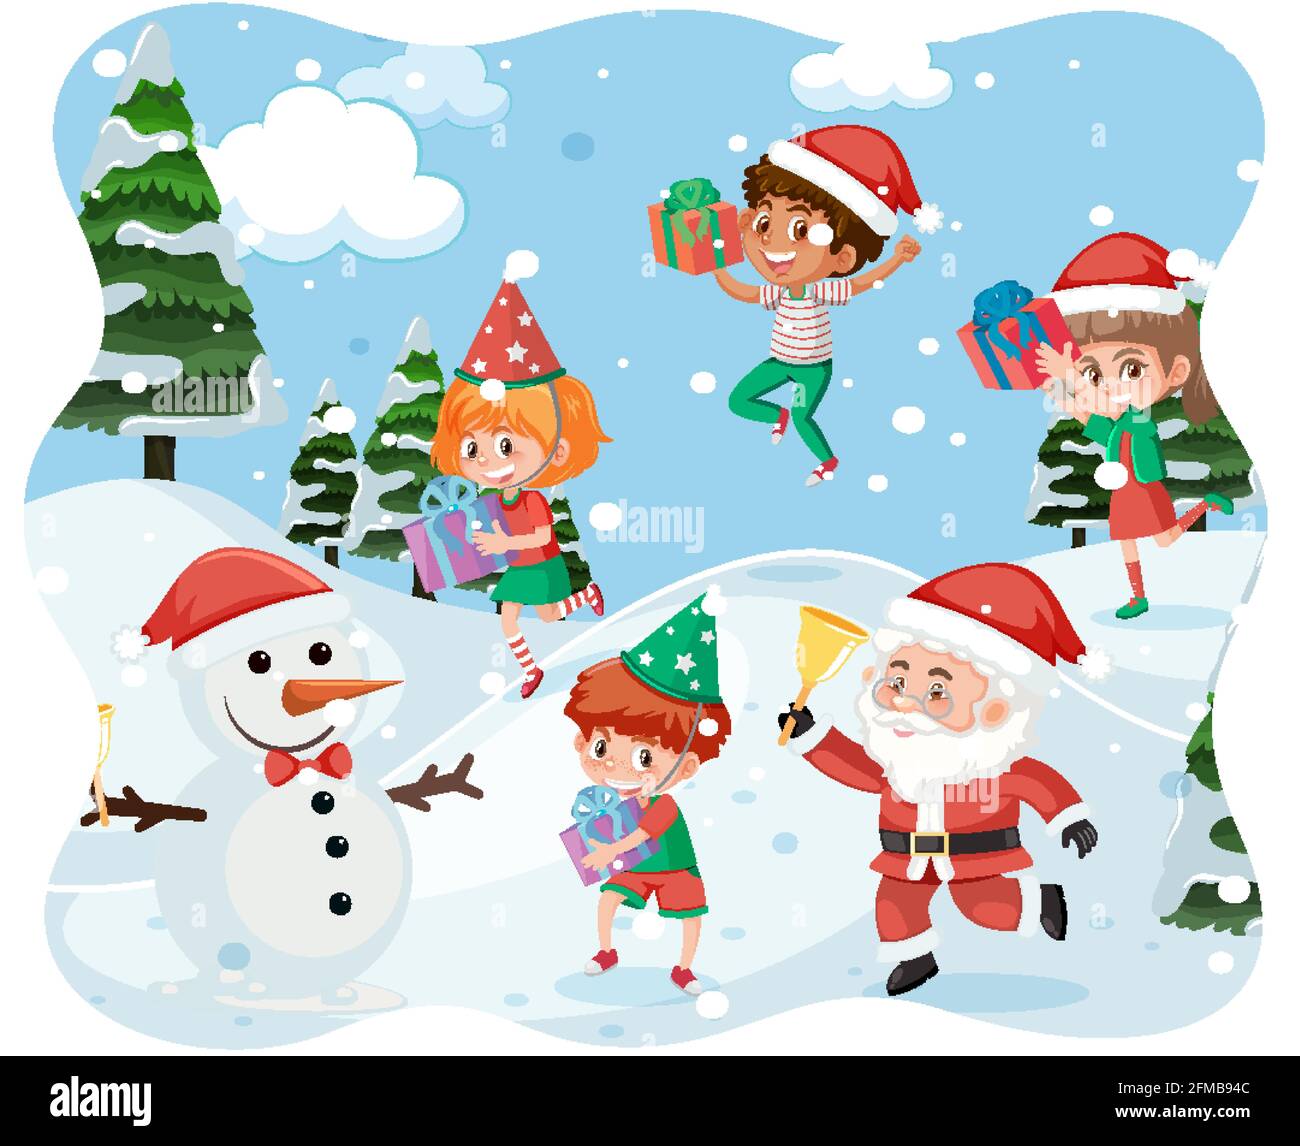 Merry Christmas scene with Santa Claus playing eith many chldren in snow scene illustration Stock Vector